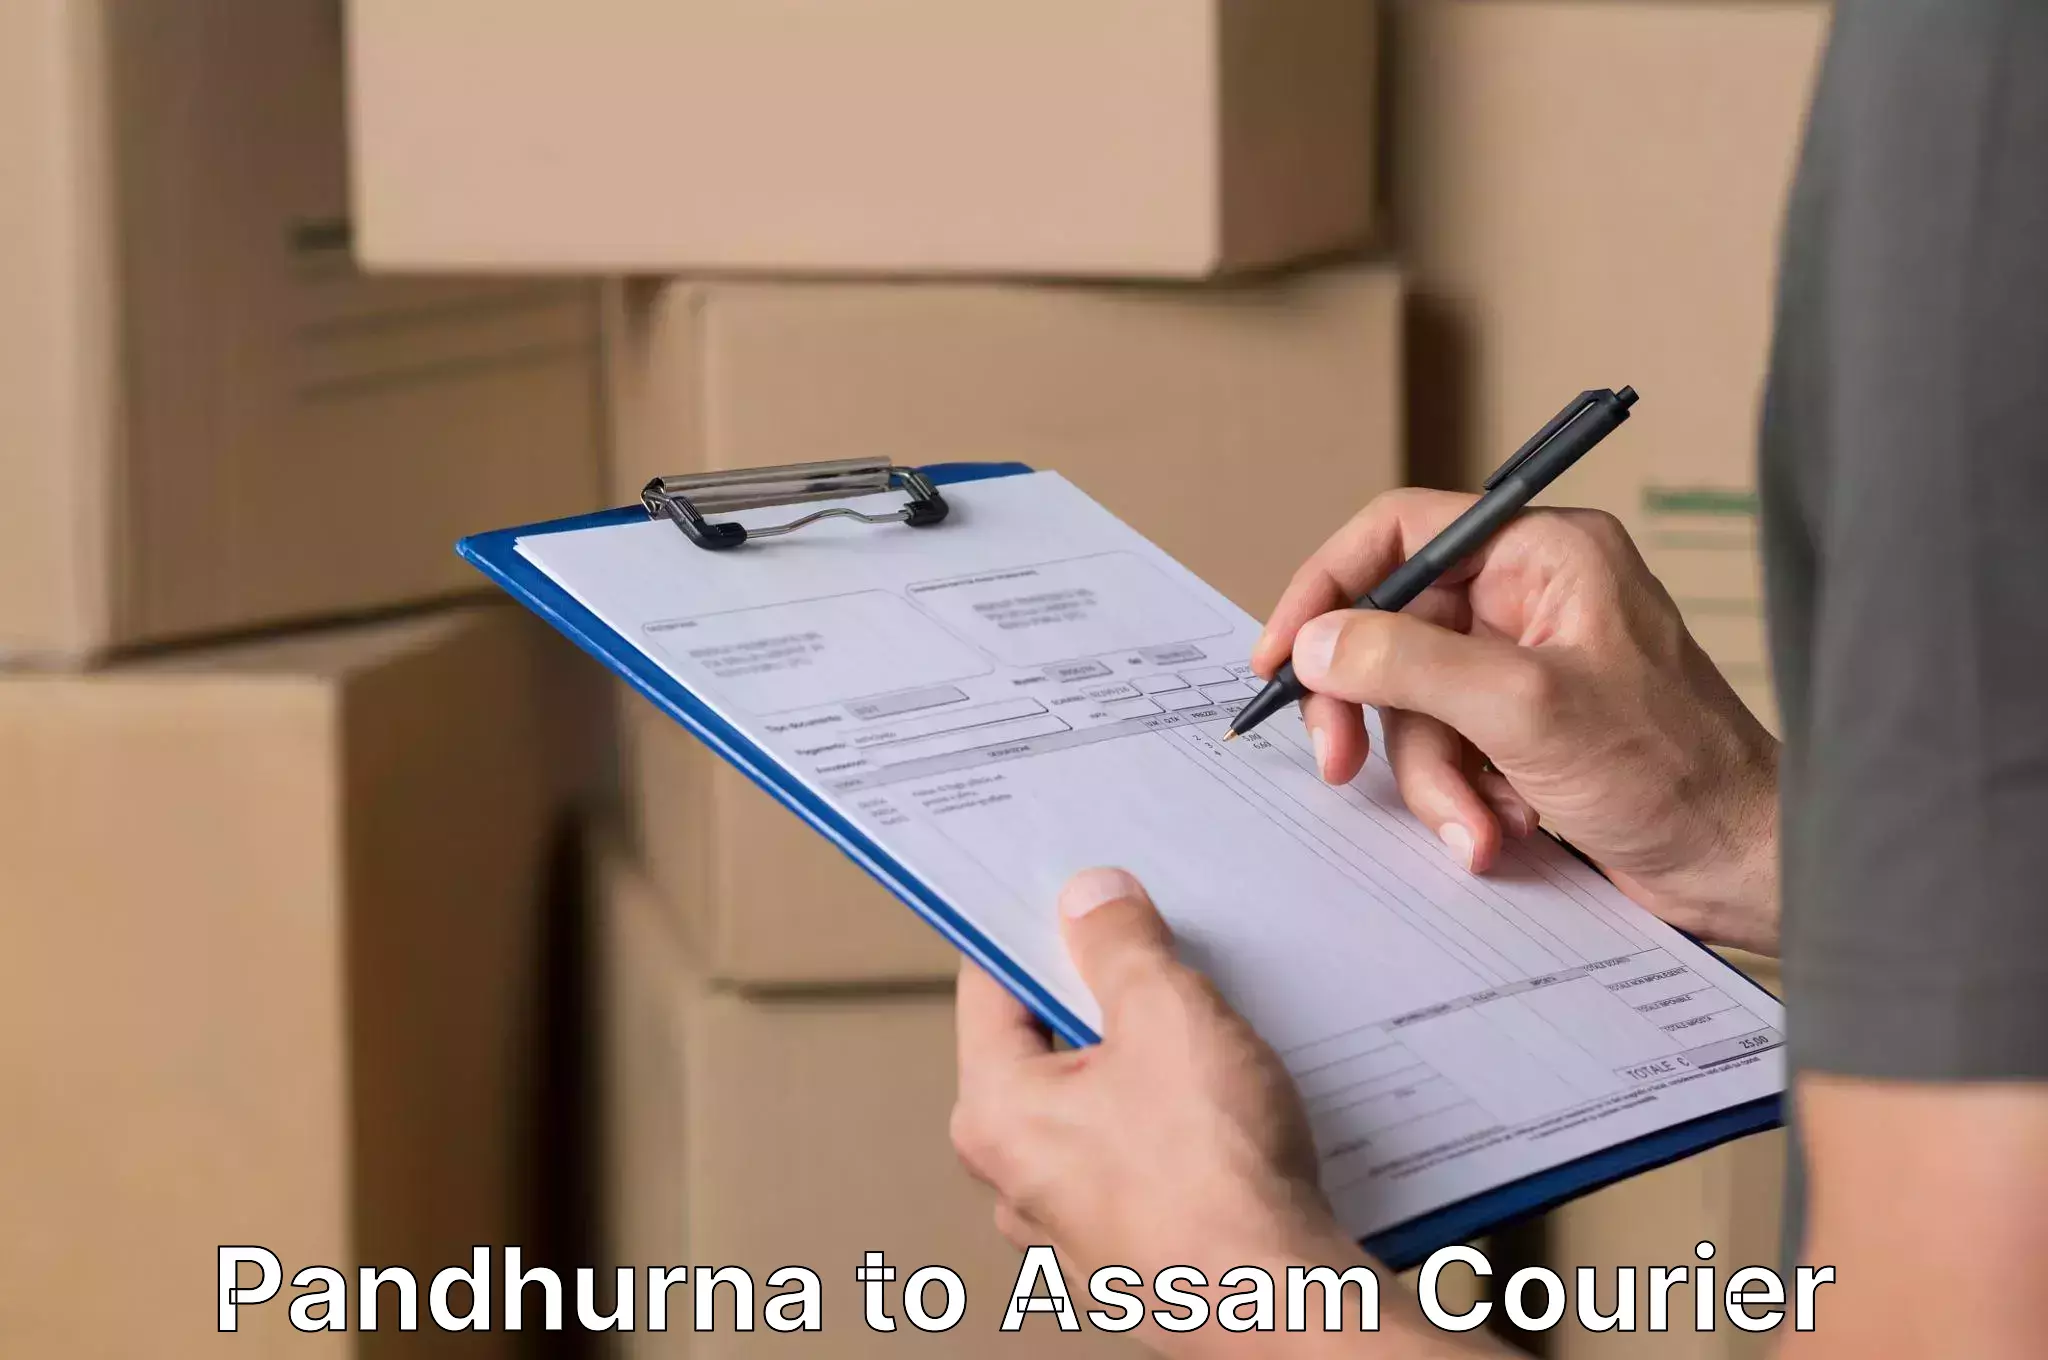 Professional furniture movers Pandhurna to Assam